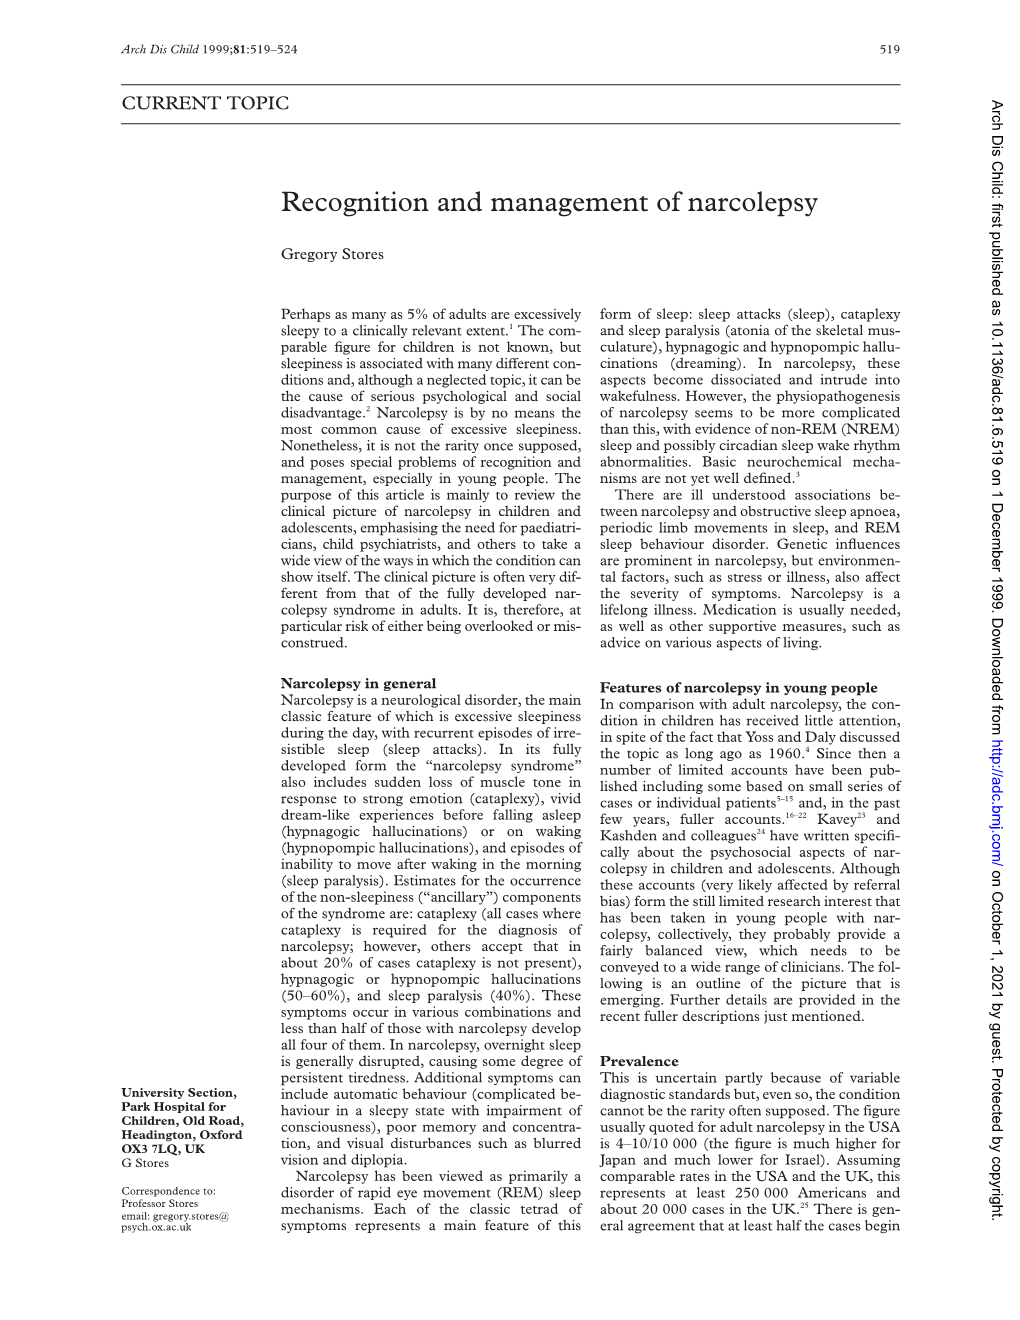 Recognition and Management of Narcolepsy